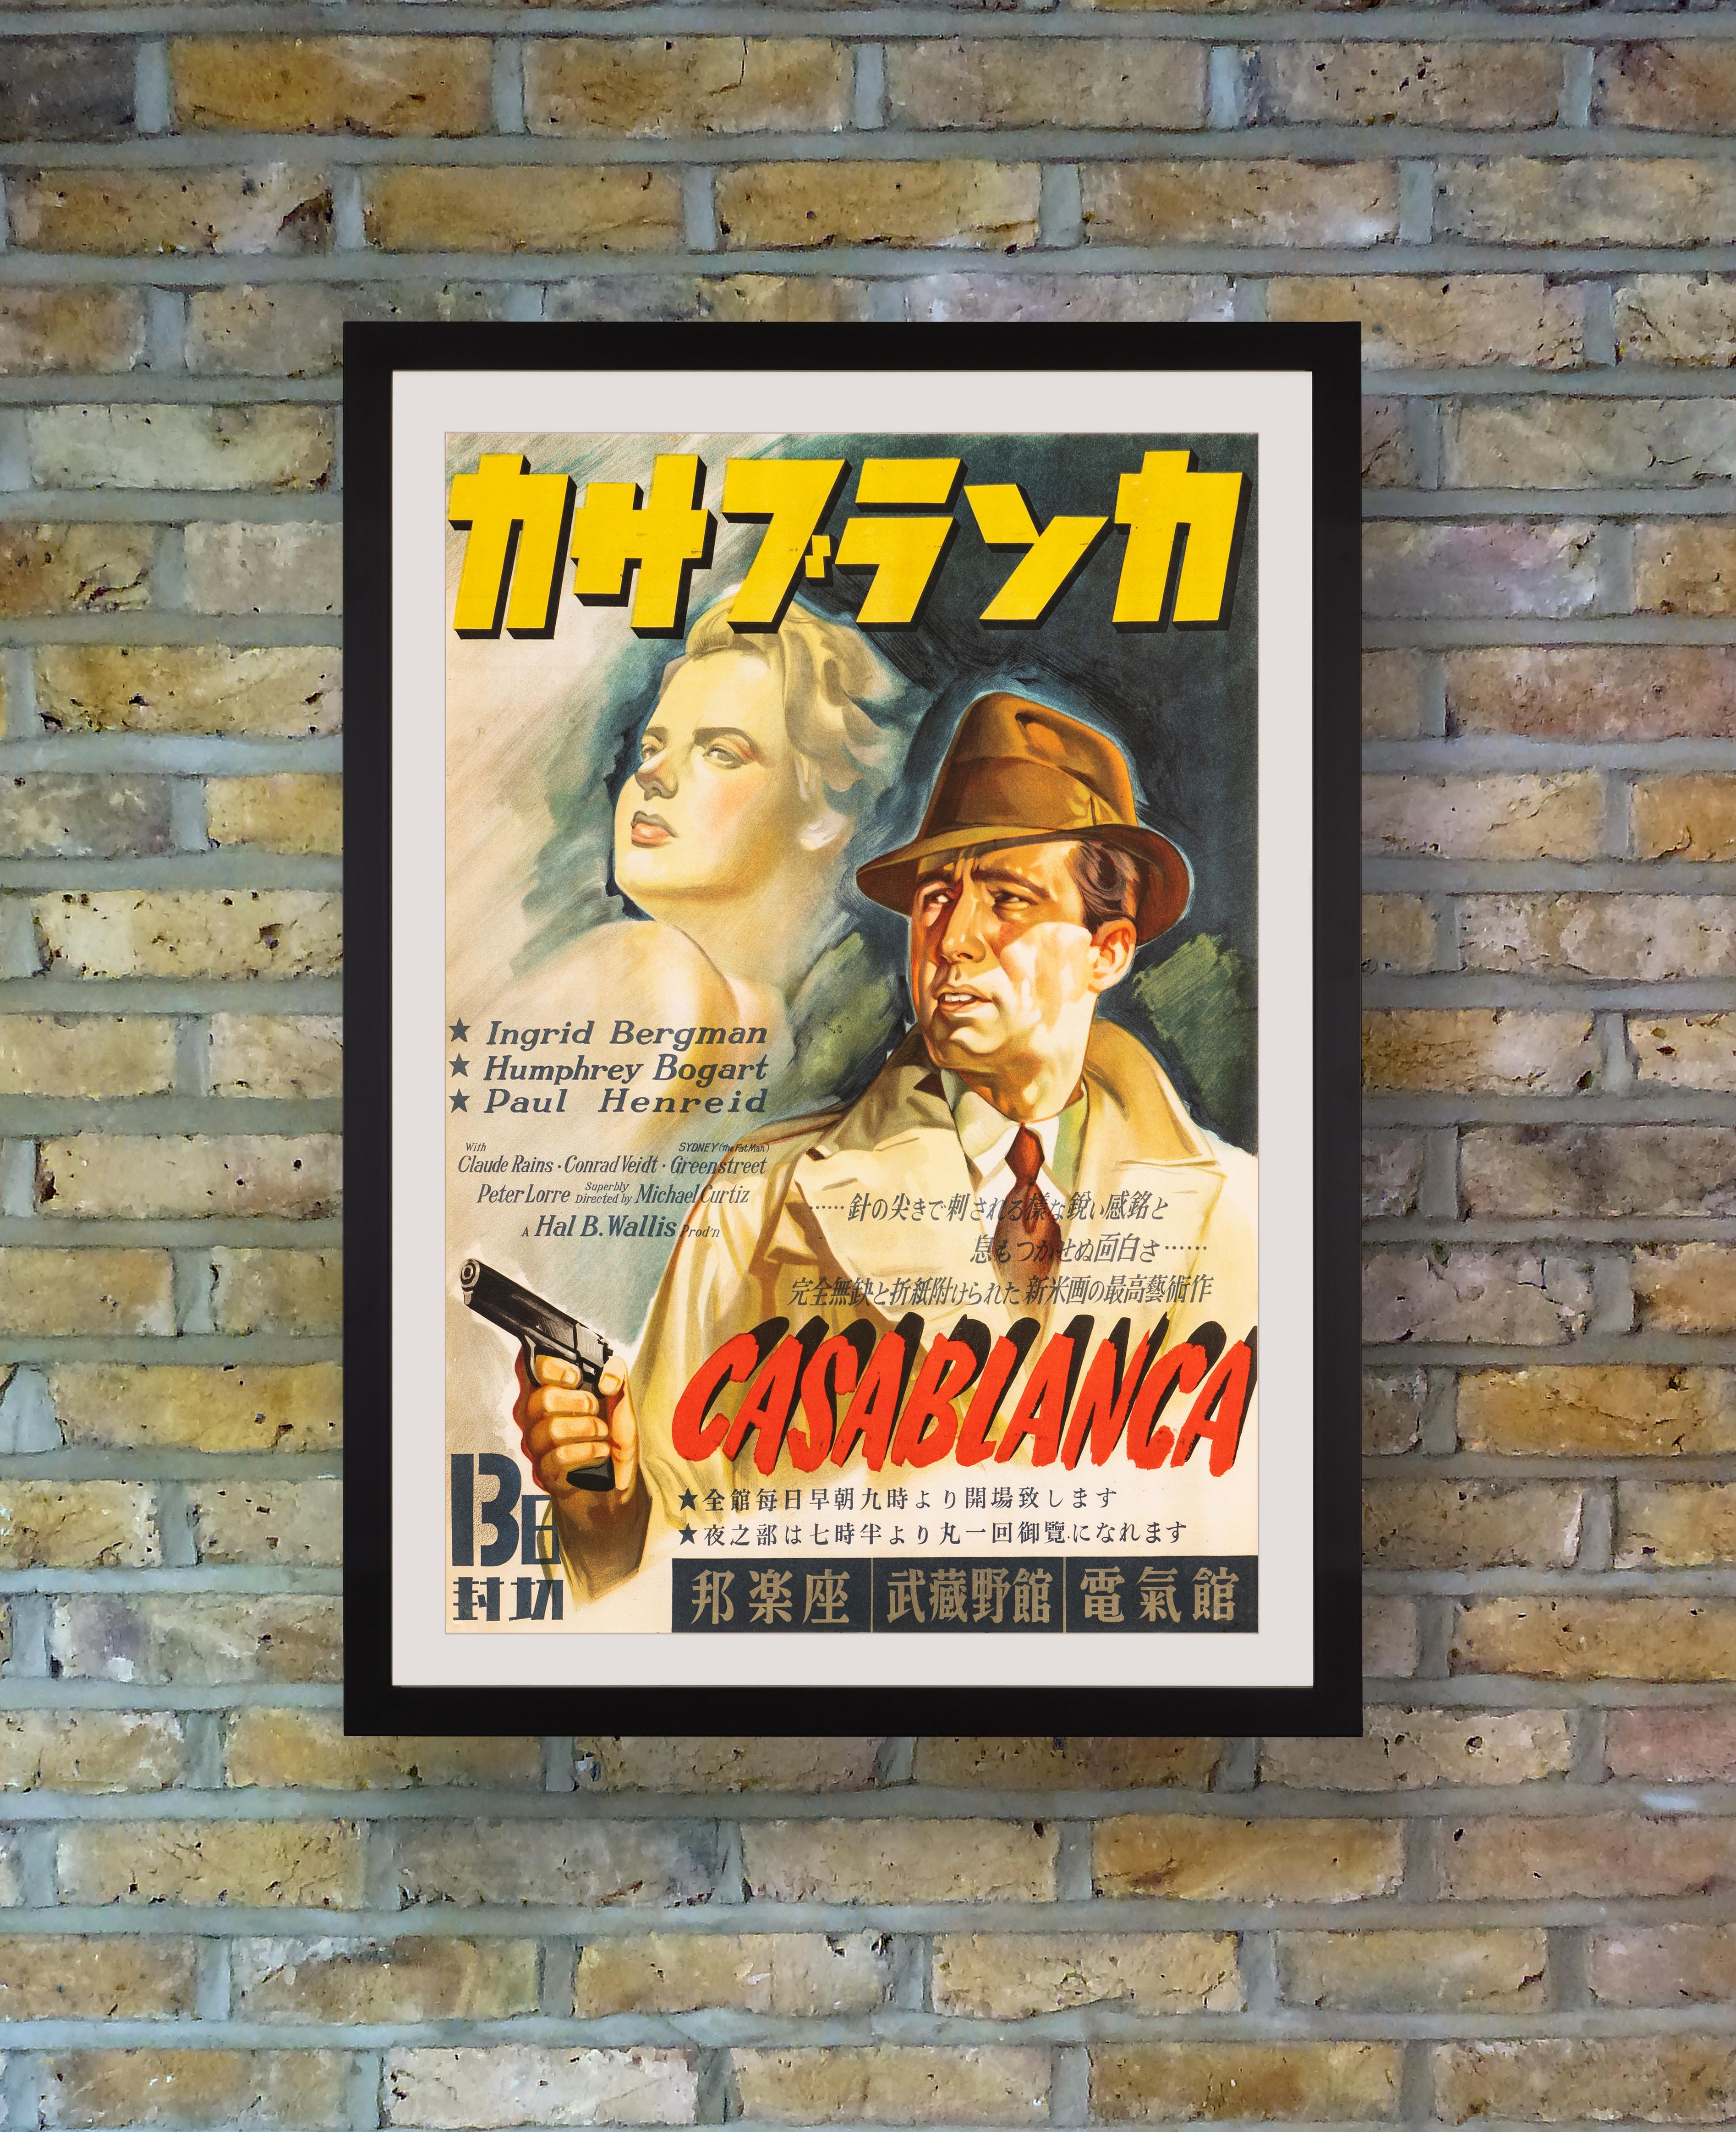 An exceedingly rare and attractive poster for the first Postwar release of 'Casablanca' in Japan, printed only for use in the three theatres where the film premiered on 13th June 1946, Musashimo Kan, Houraku Zza, and Denkikan. Following Japan's